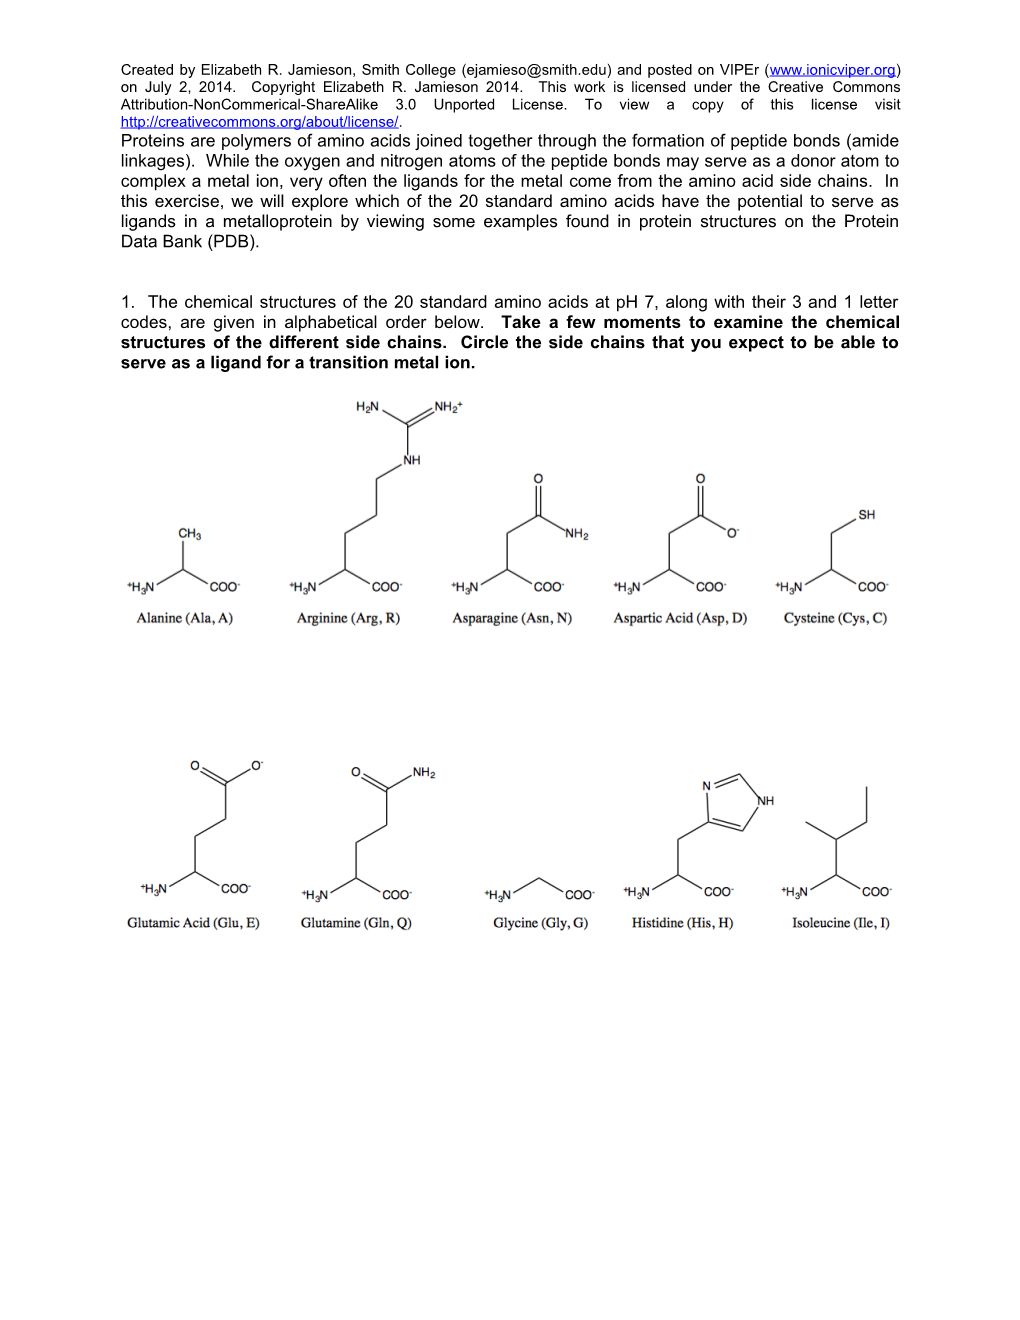 1. the Chemical Structures of the 20 Standard Amino Acids at Ph 7, Along with Their 3 And